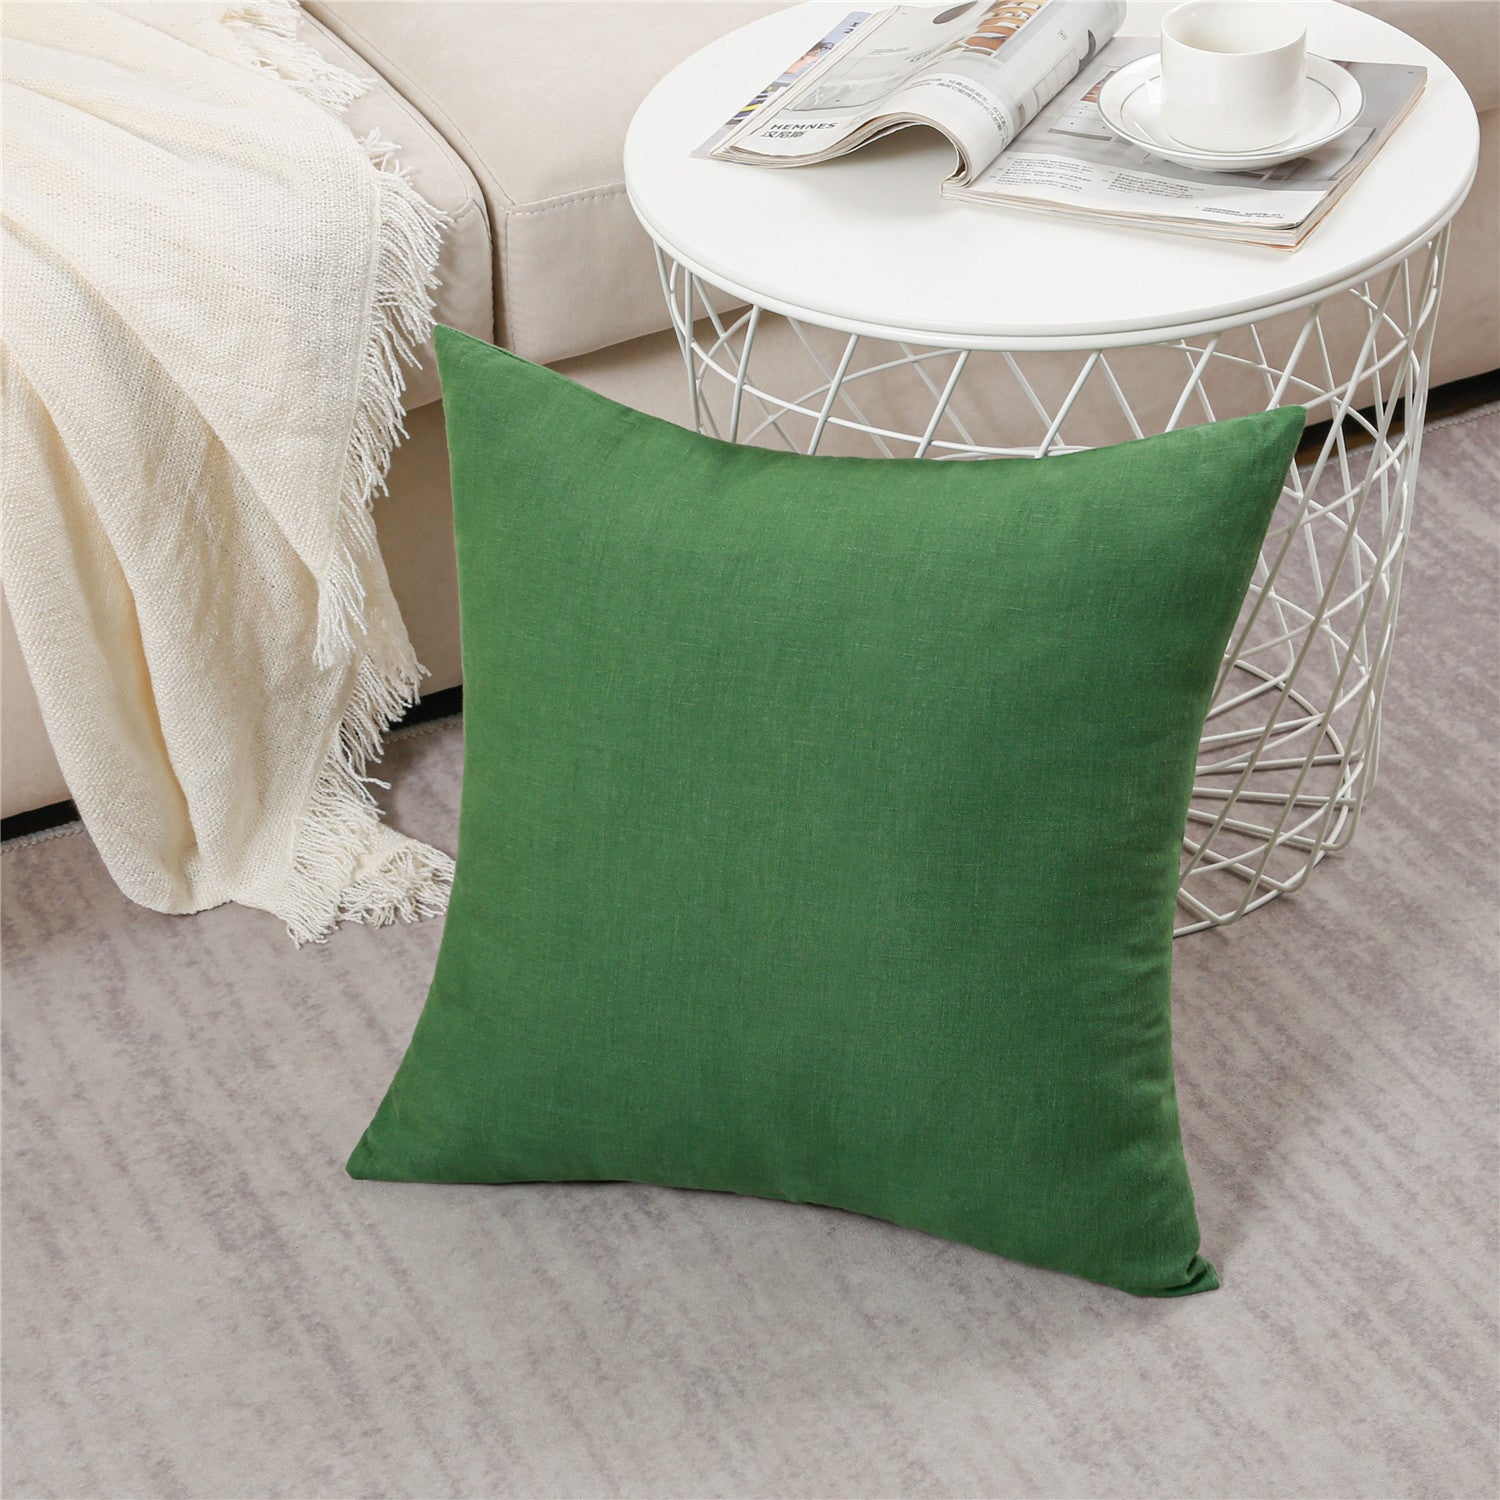 Farmhouse Pillow Covers for Couch Bed Car